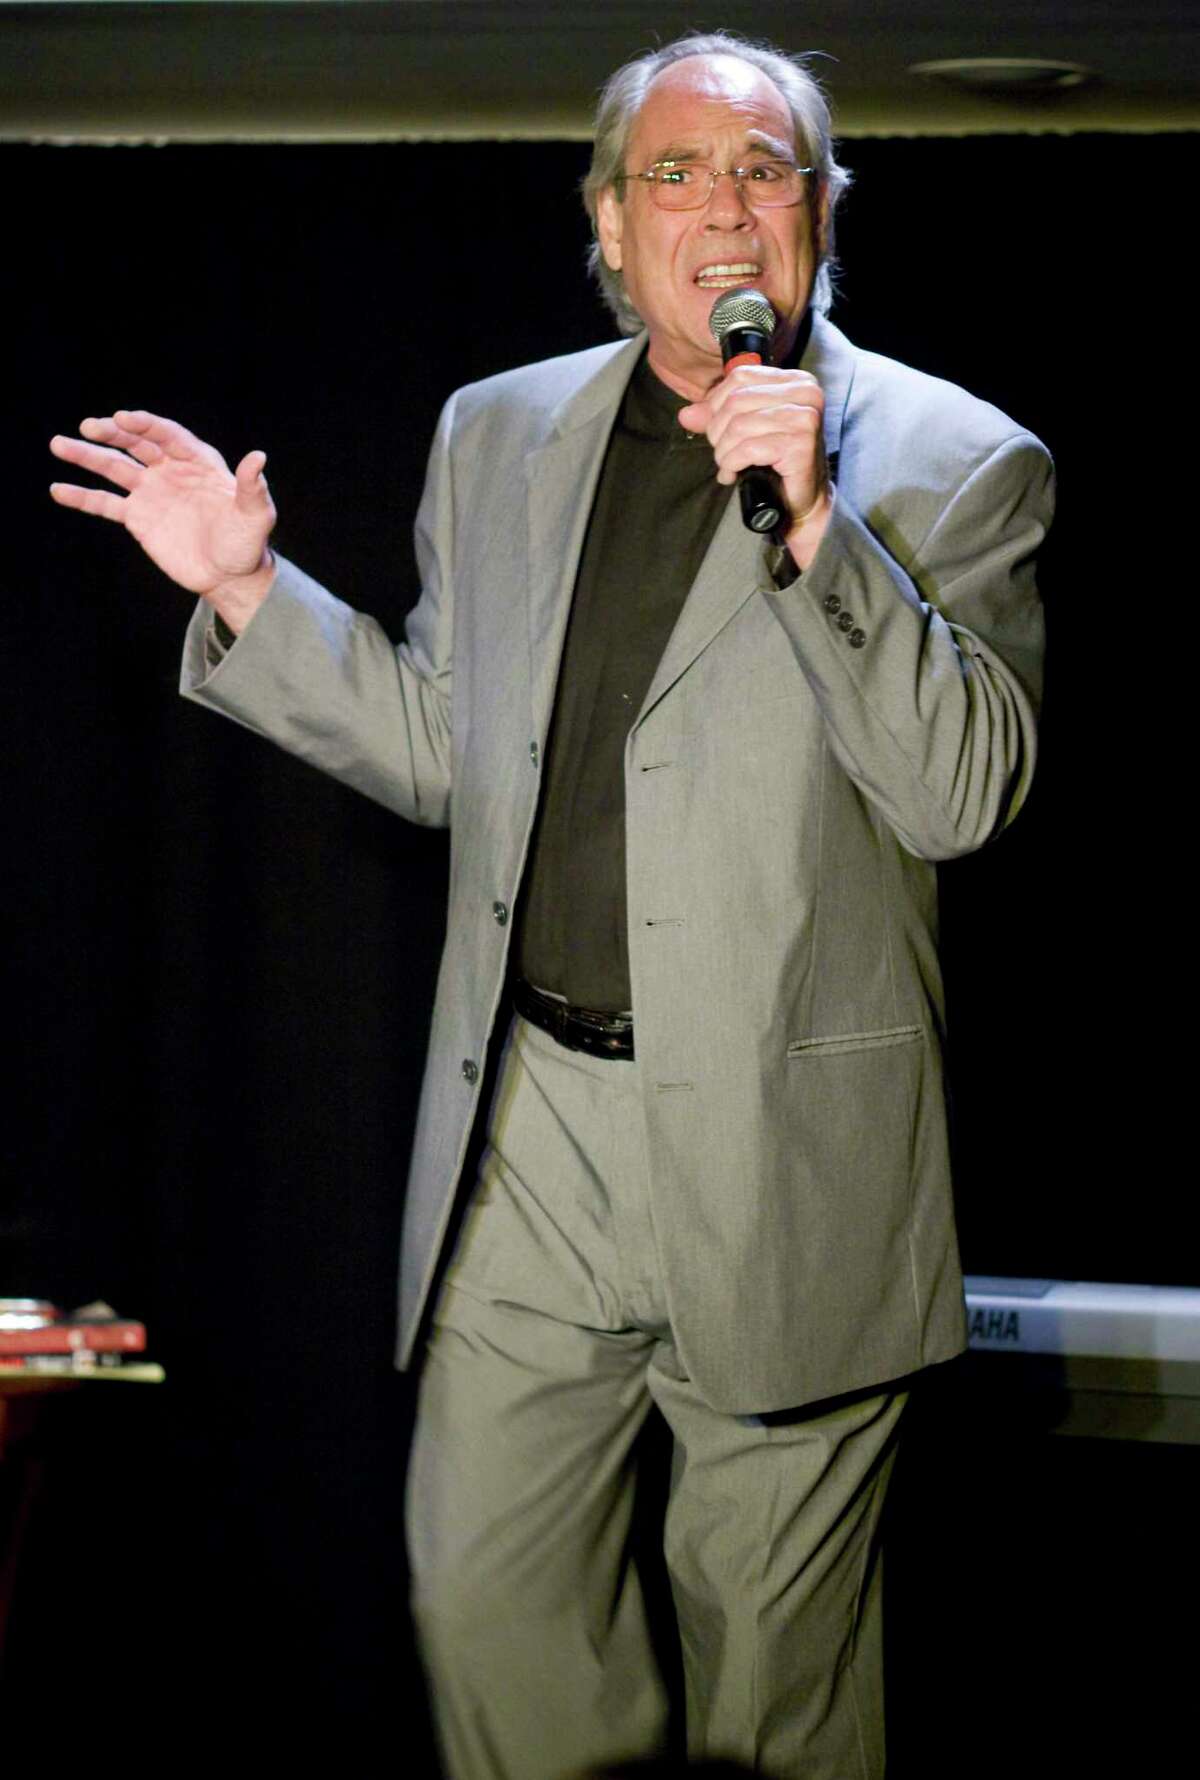 Comic Robert Klein is the subject of a new documentary.